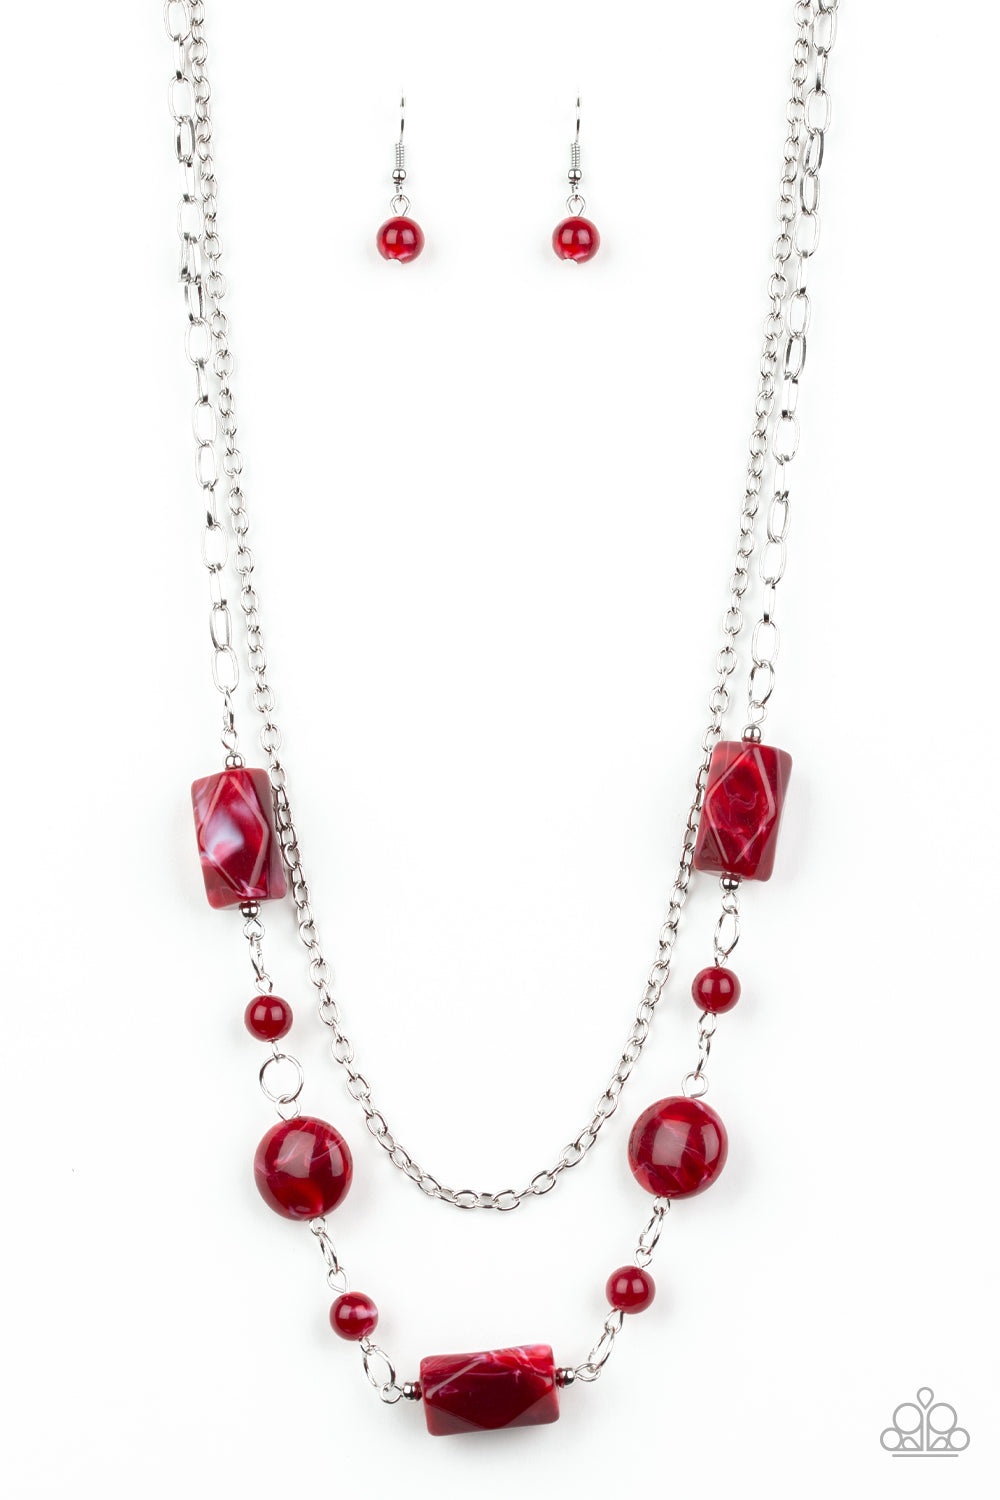 Colorfully Cosmopolitan - Red necklace